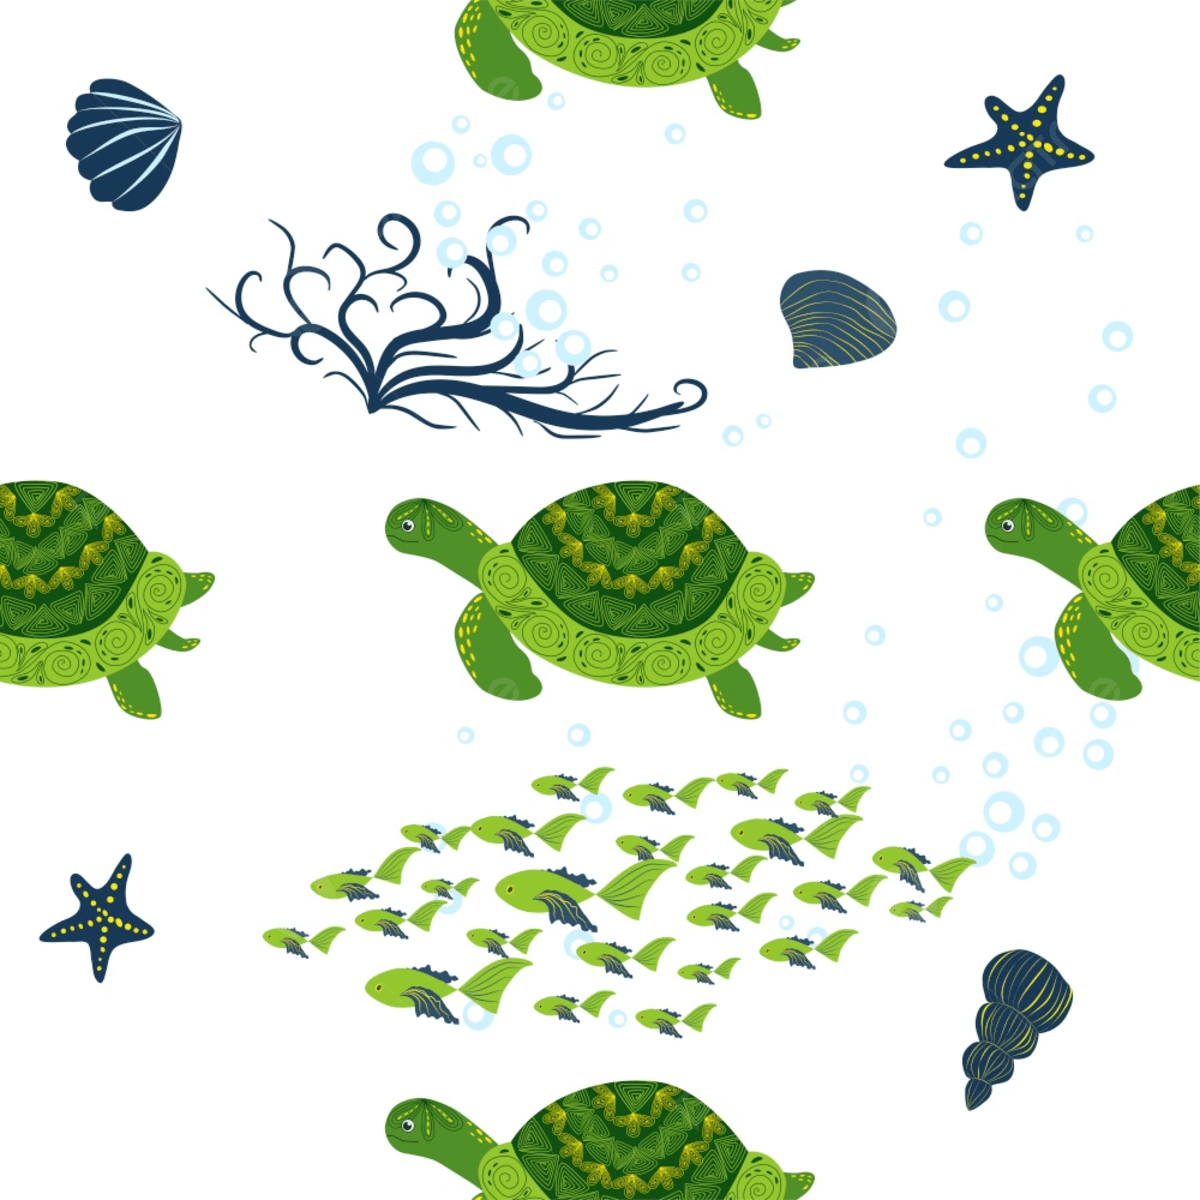 A pattern of green sea turtles, starfish, and shells - Turtle